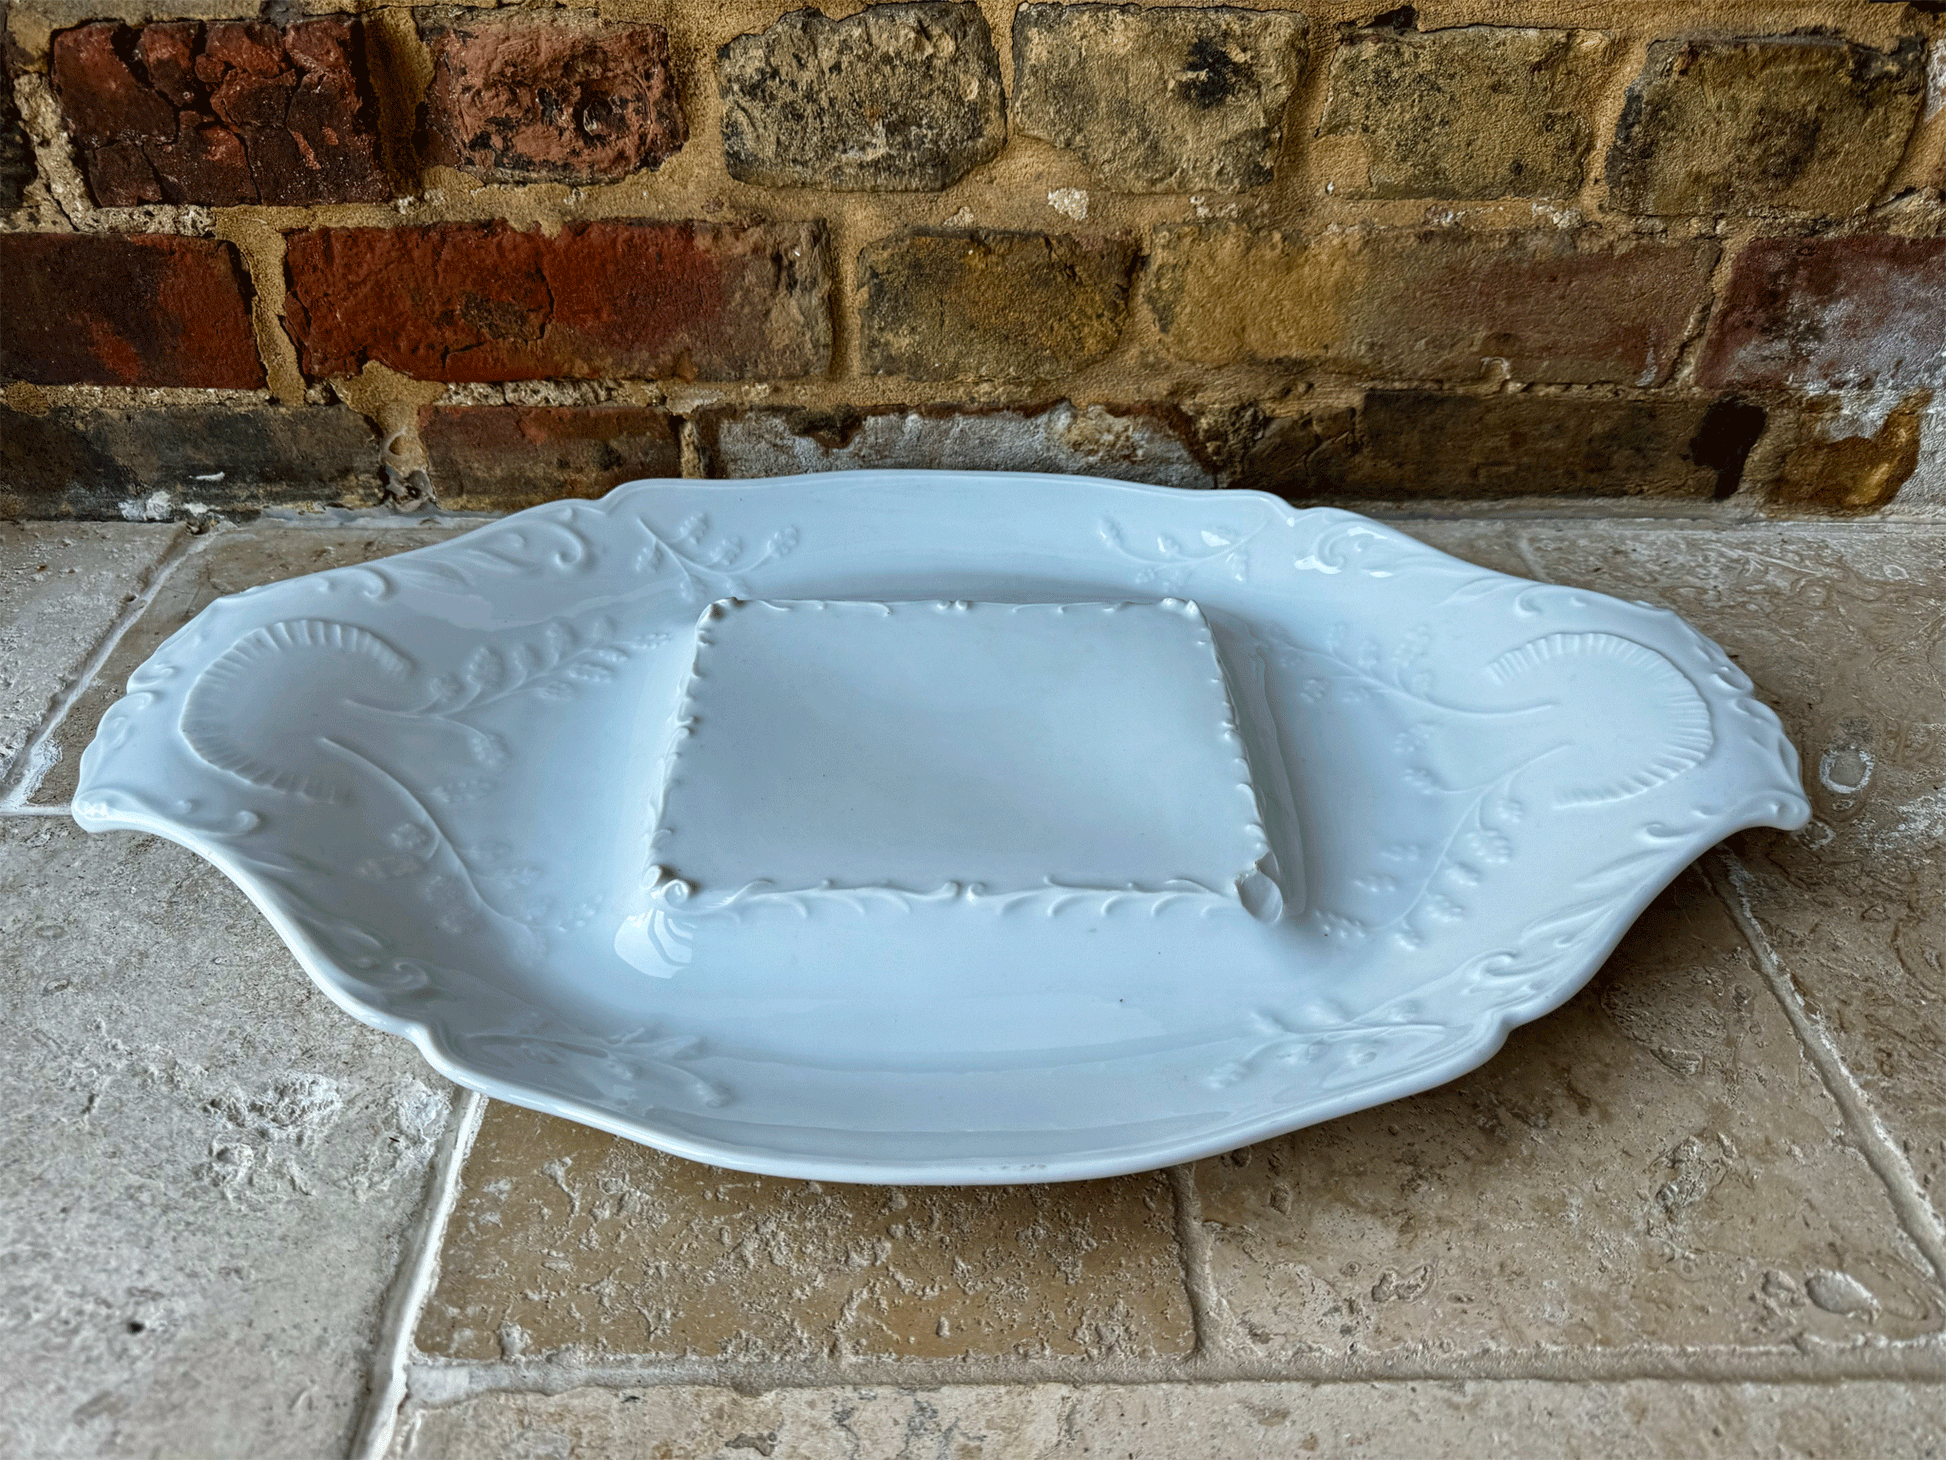 rare antique french extra large decorative white ironstone patisserie stand platter